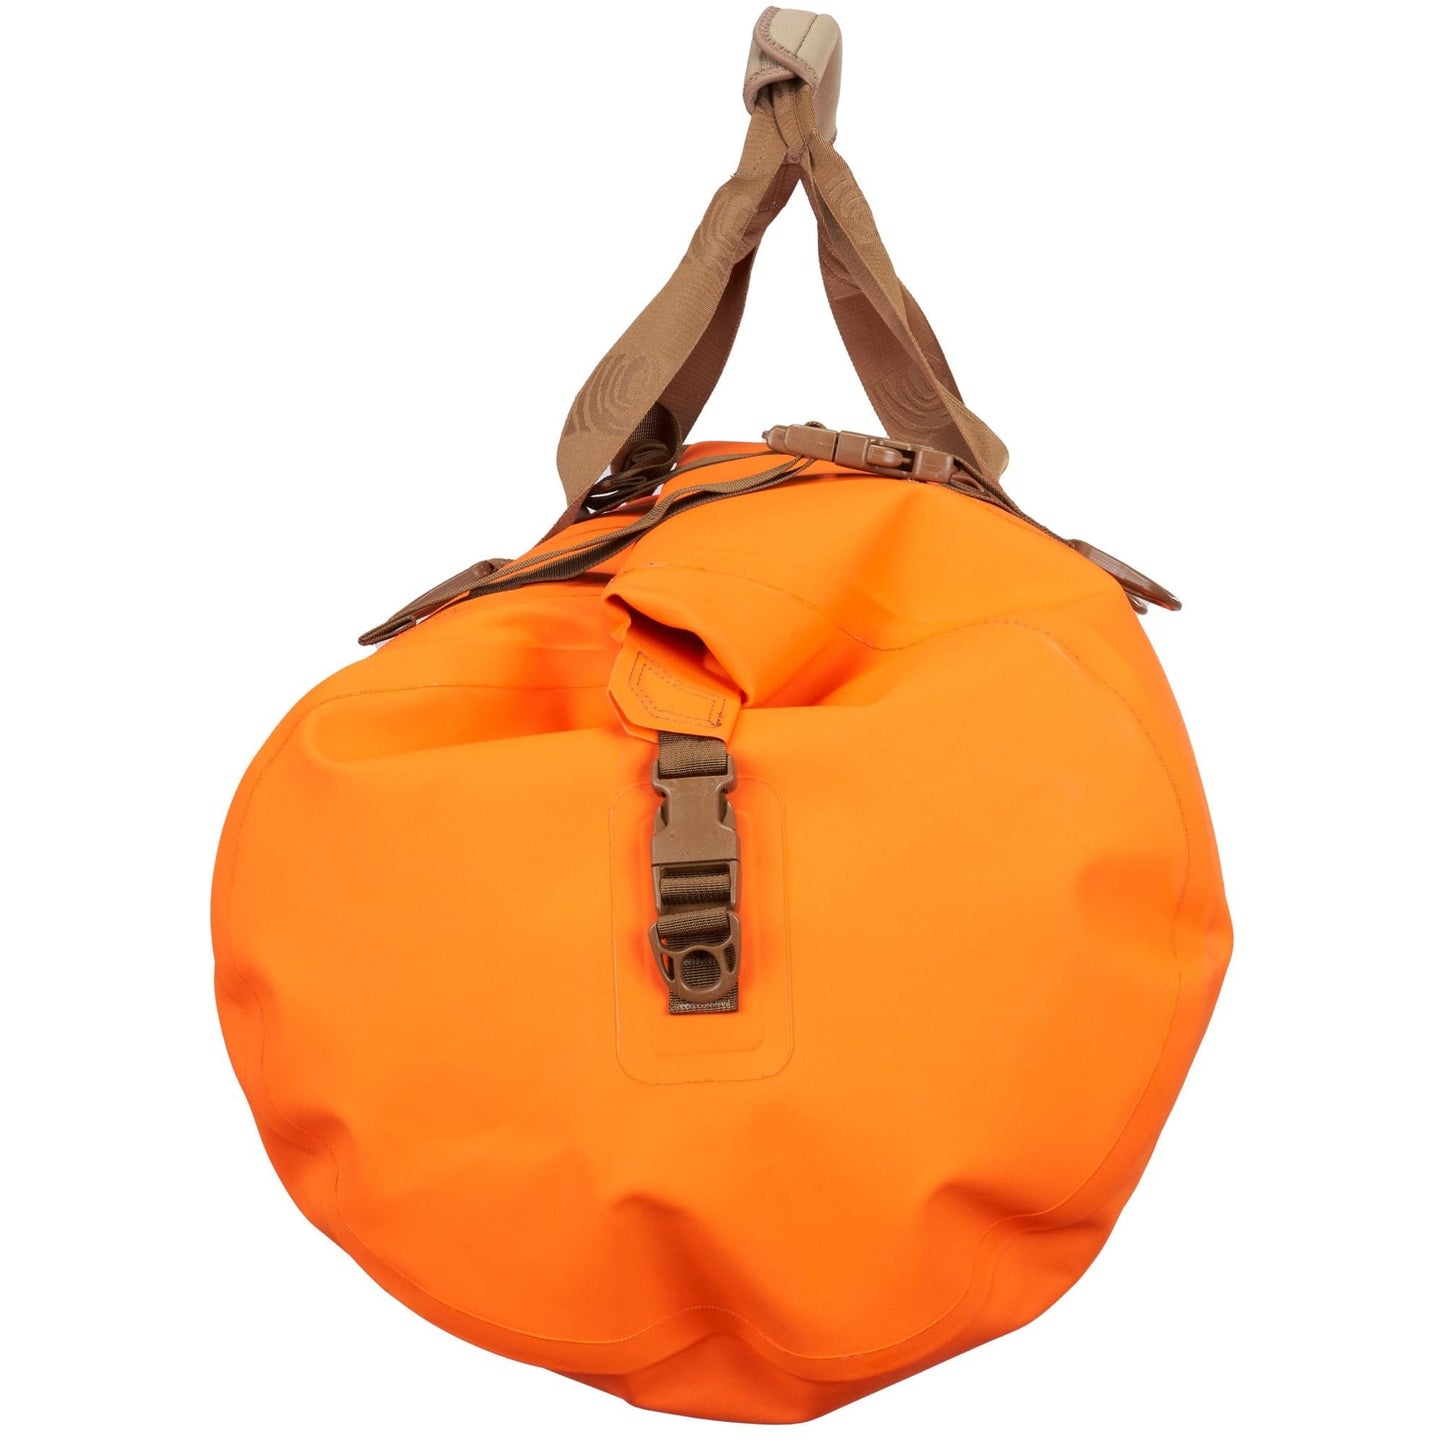 Featuring the Mississippi Duffel dry bag manufactured by Watershed shown here from a third angle.